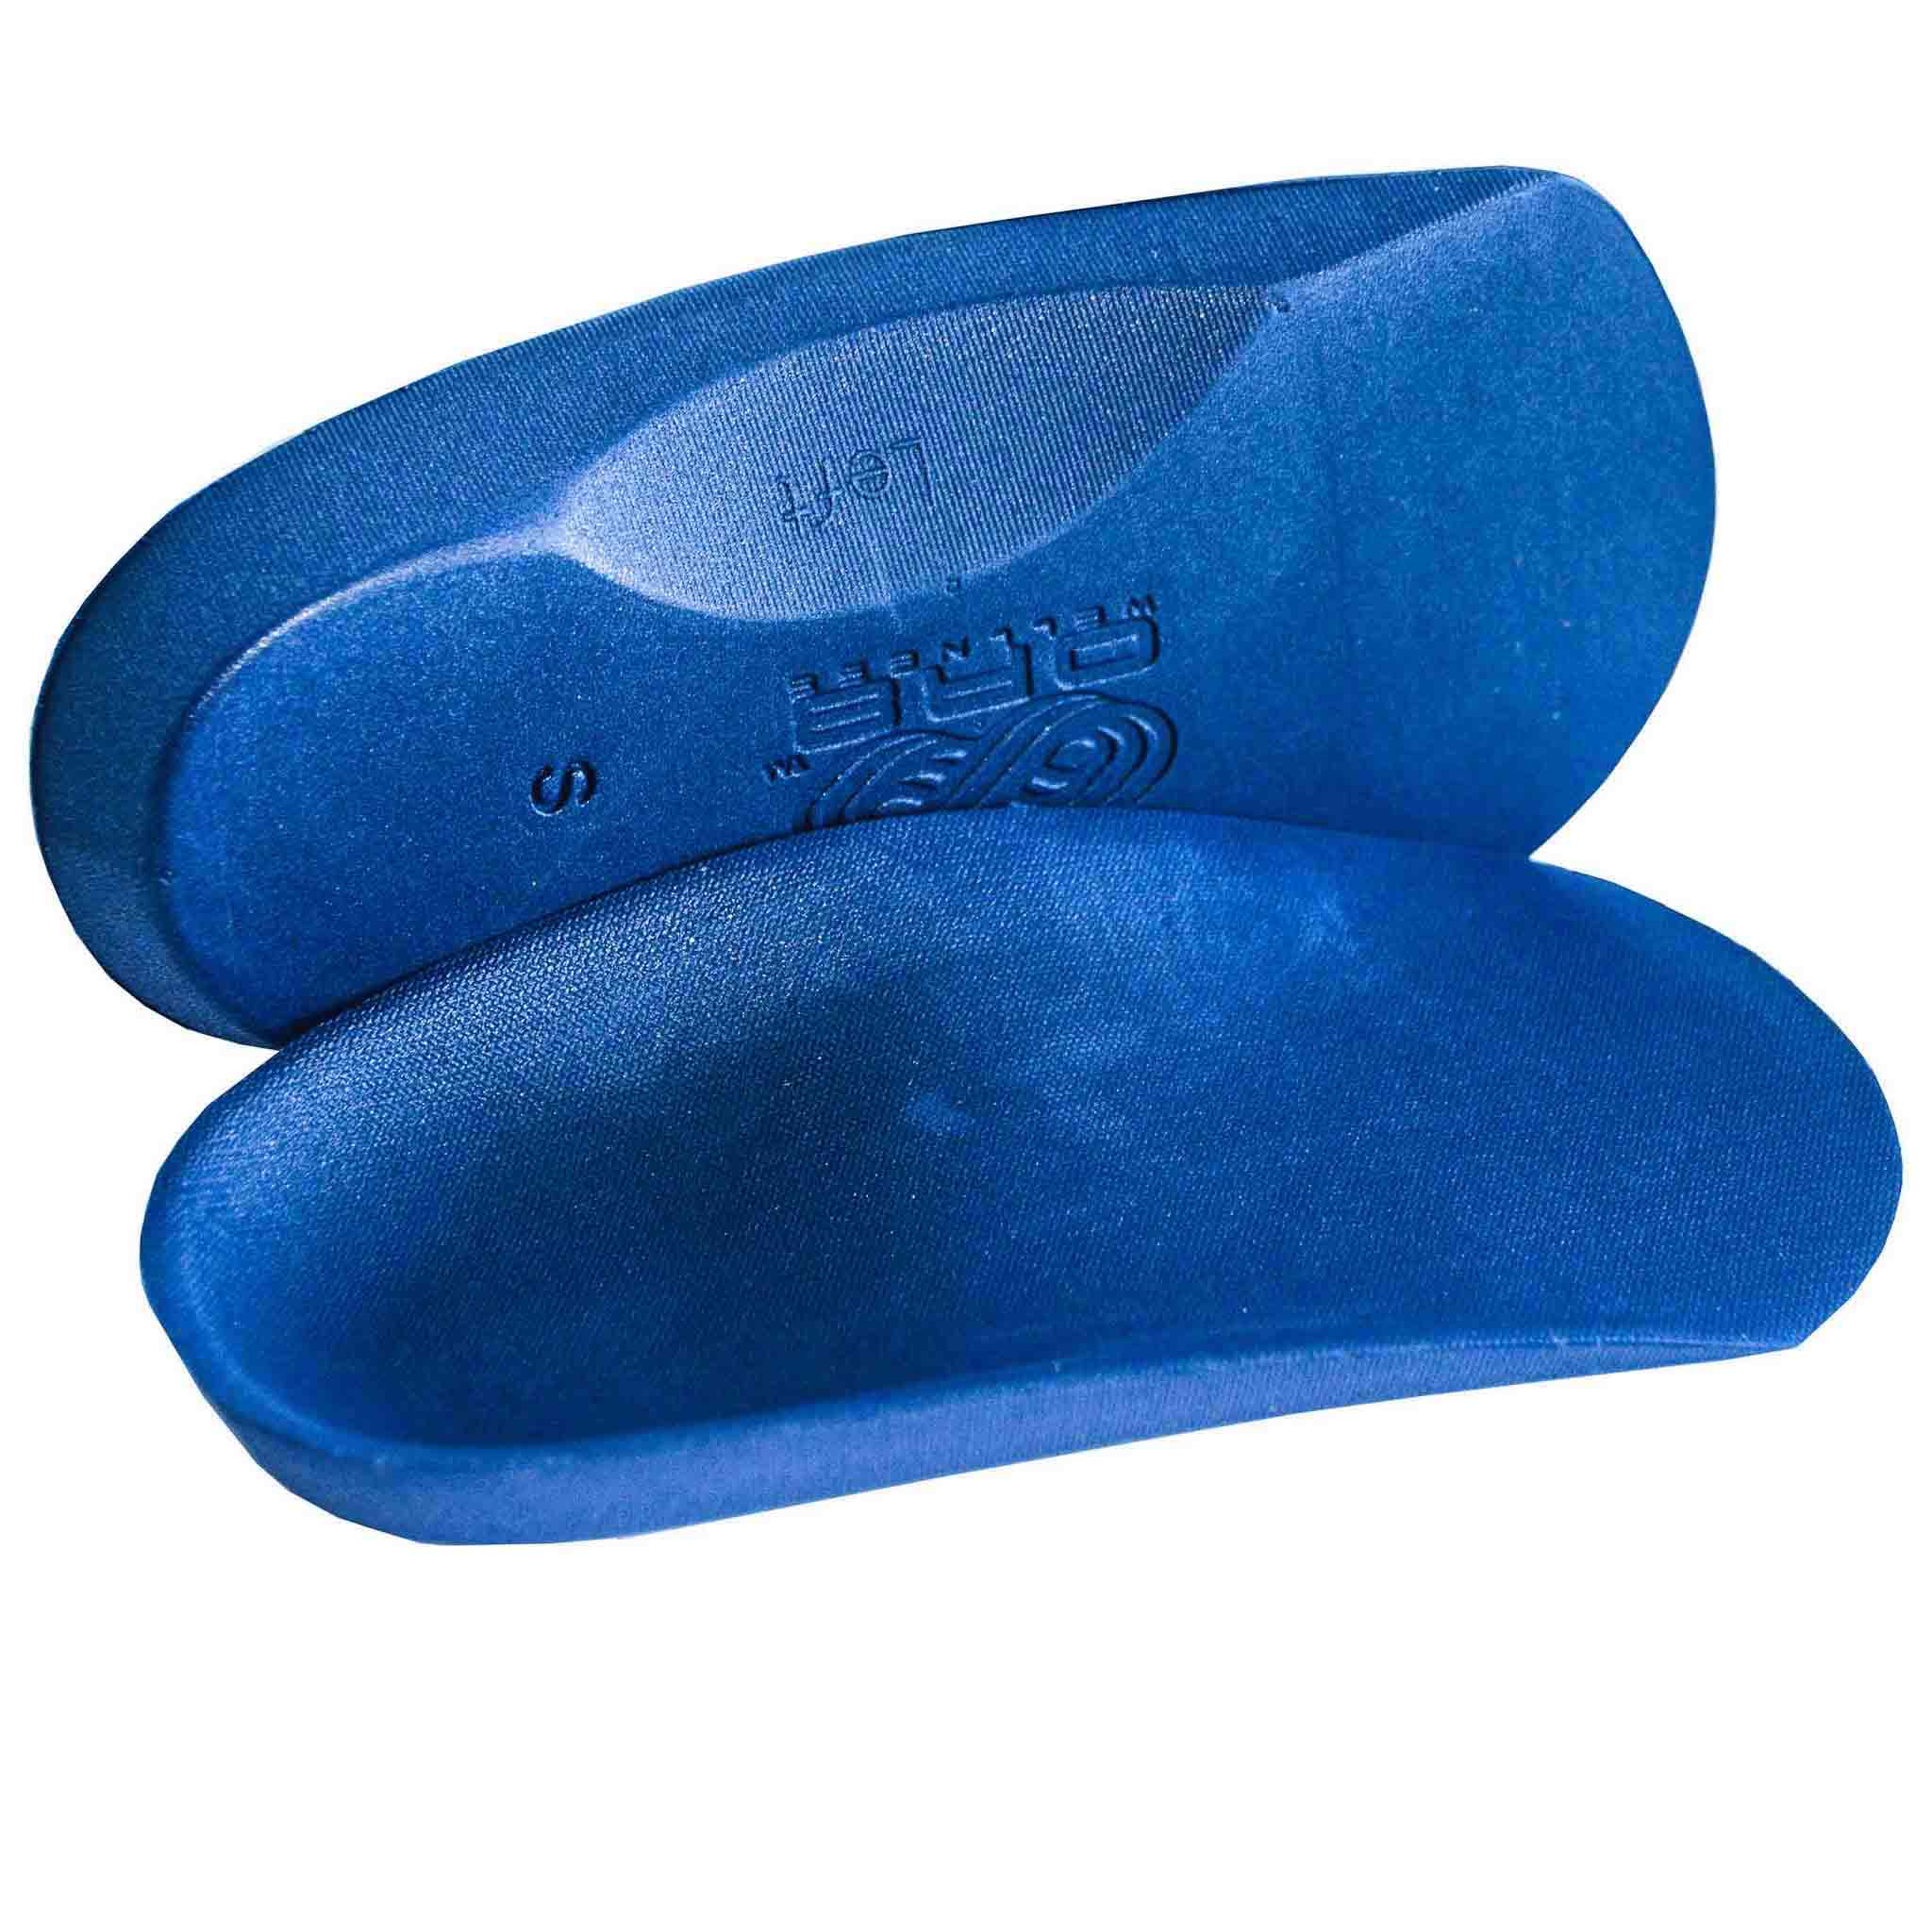 3/4 ADAPTABLE MOULDABLE INSOLE WITH MET RAISE 